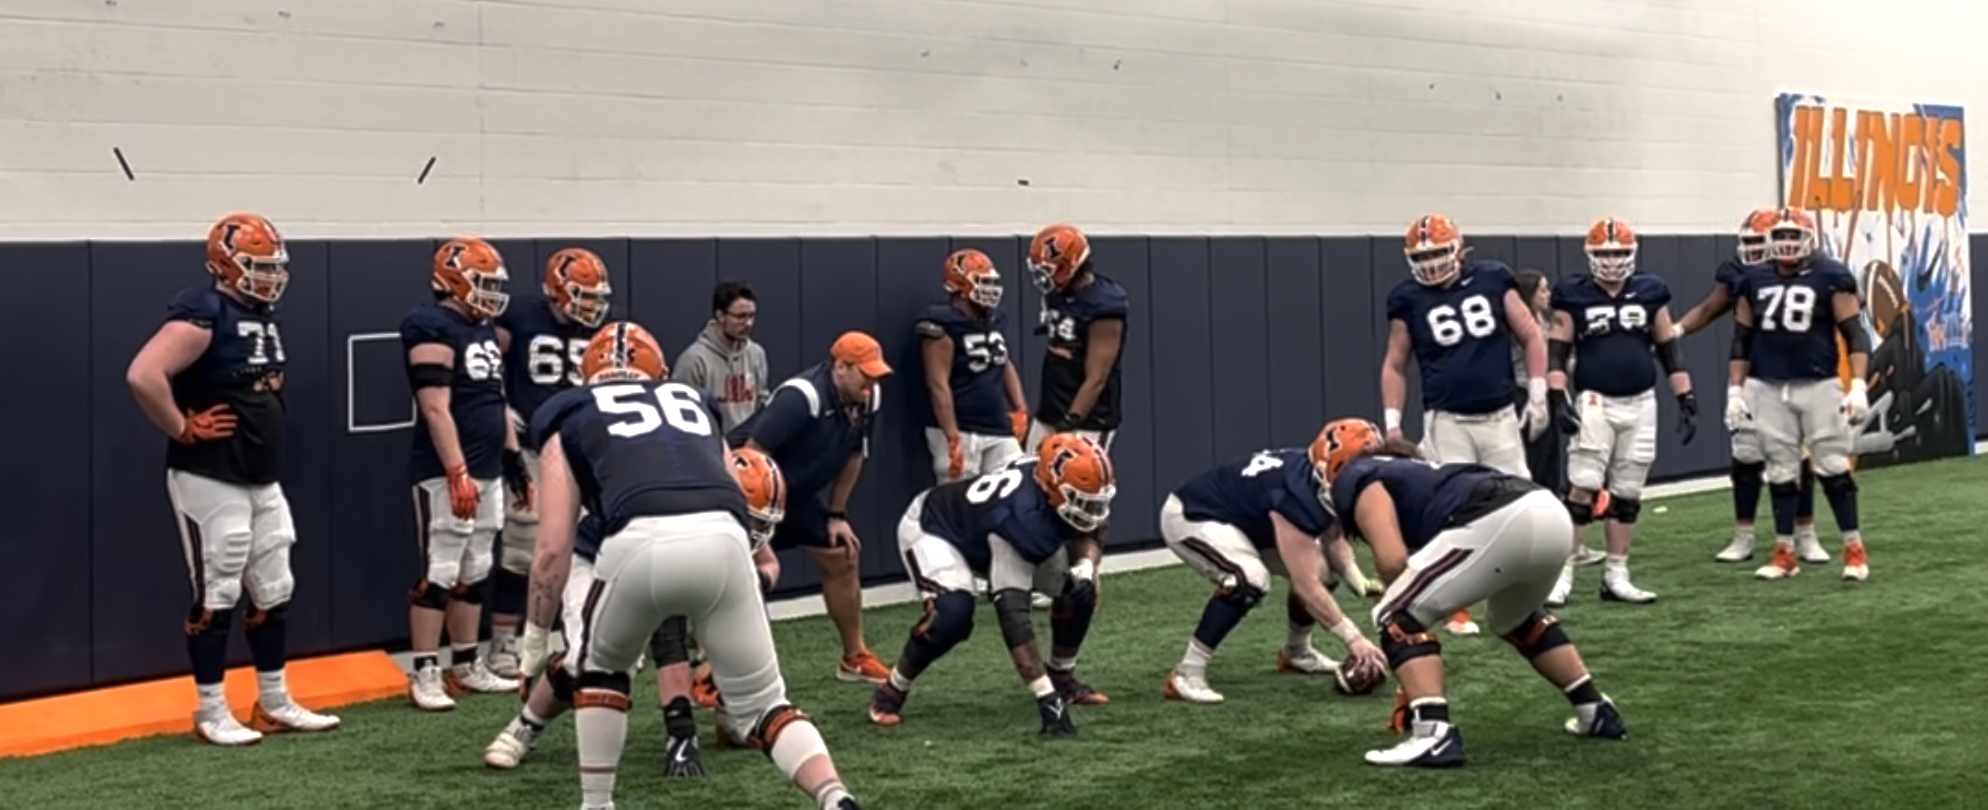 Illini Football 2023 Spring Practice Report #2 (Practice No. 3) - Illini Offensive Line Pieces Coming Together